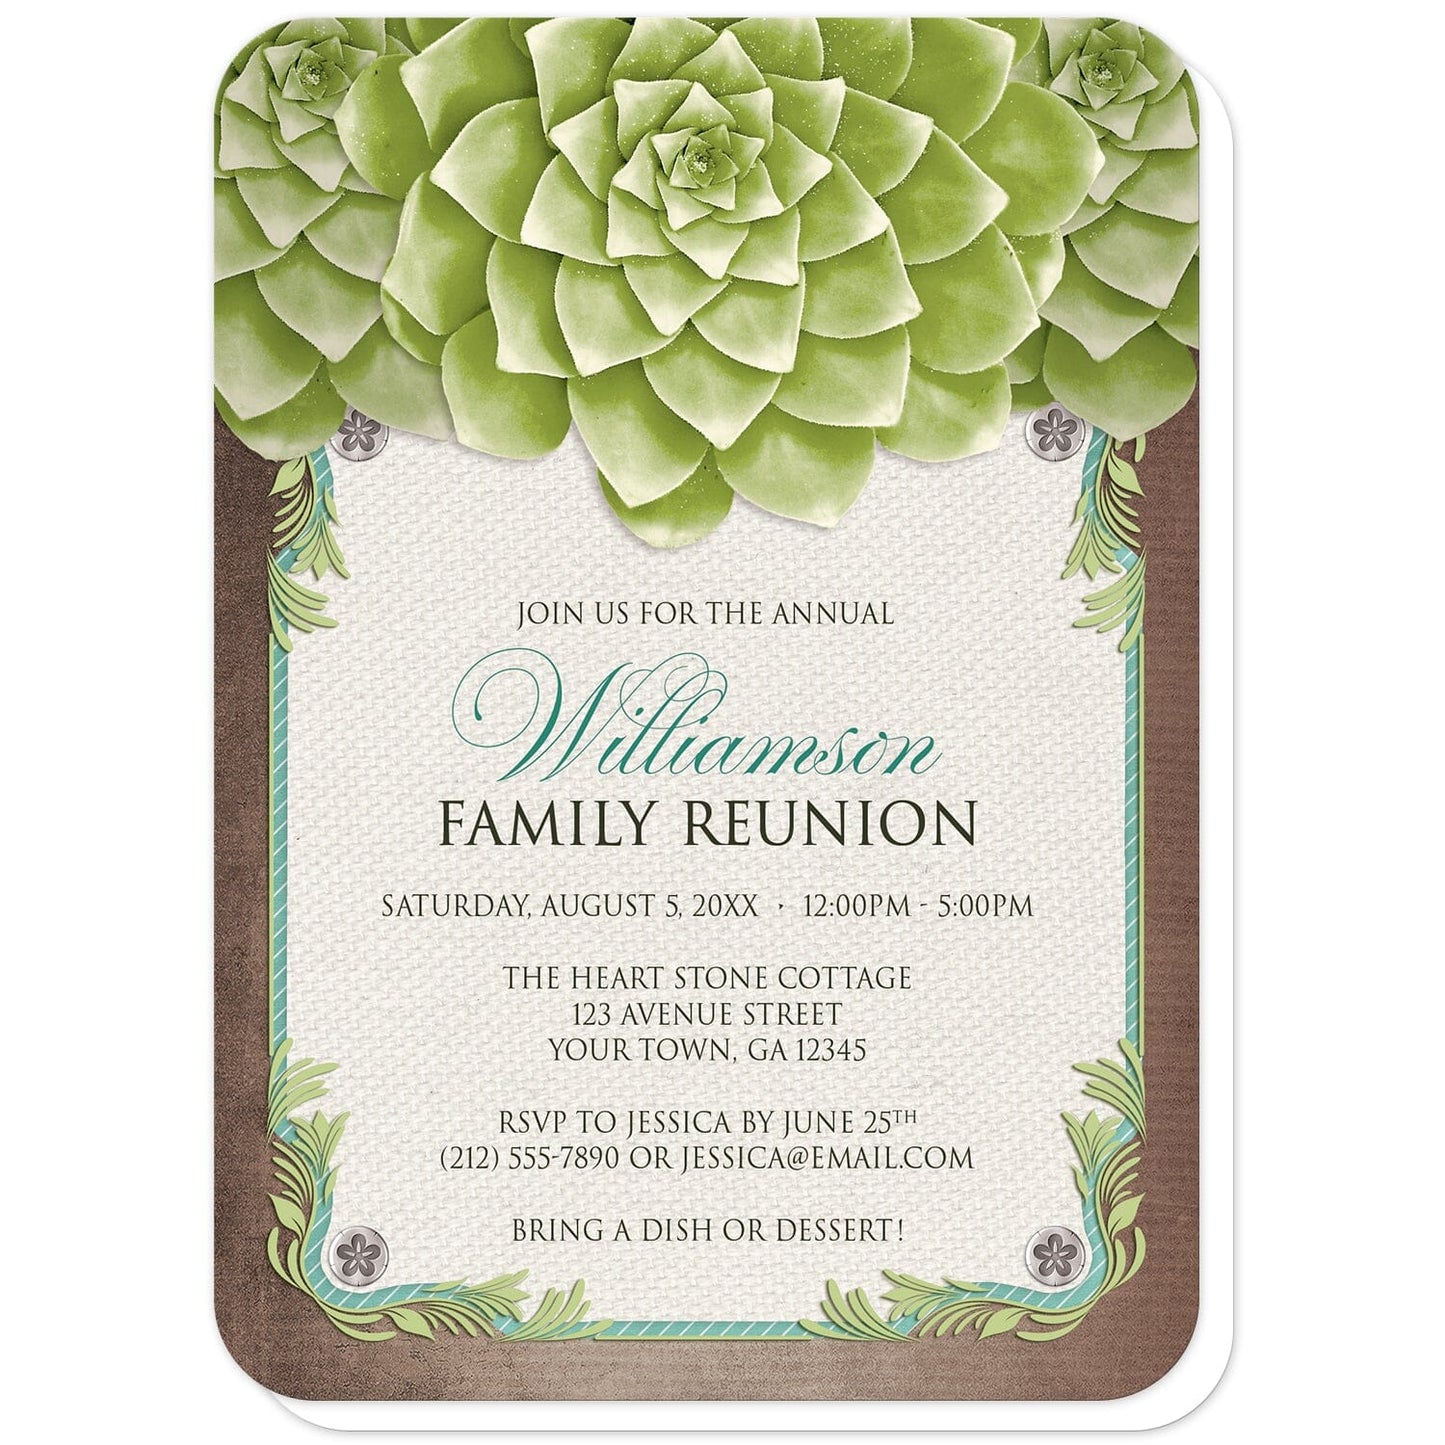 Rustic Succulent Garden Family Reunion Invitations (with rounded corners) at Artistically Invited. Invites with three large and lovely green succulents along the top over a beige canvas texture illustration framed with a leafy green decorative border, striped teal, and four floral metal pin illustrations, all over a brown background along the edges. Your personalized reunion celebration details are custom printed in brown and teal over the beige canvas background in the center area below the succulents.